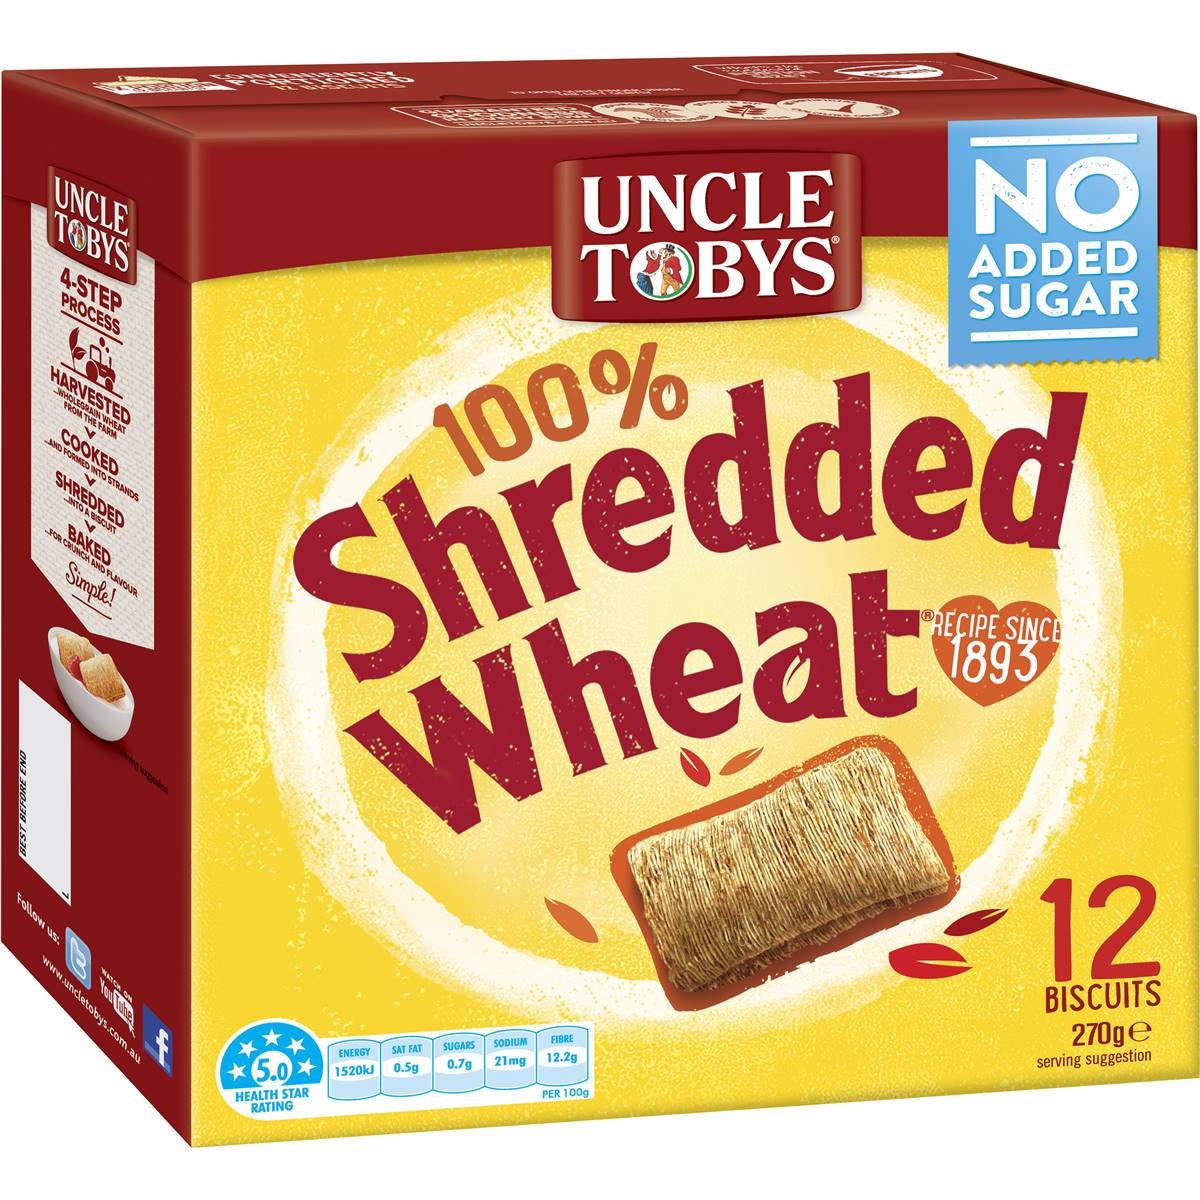 Calories in Uncle Tobys Shredded Wheat Breakfast Cereal